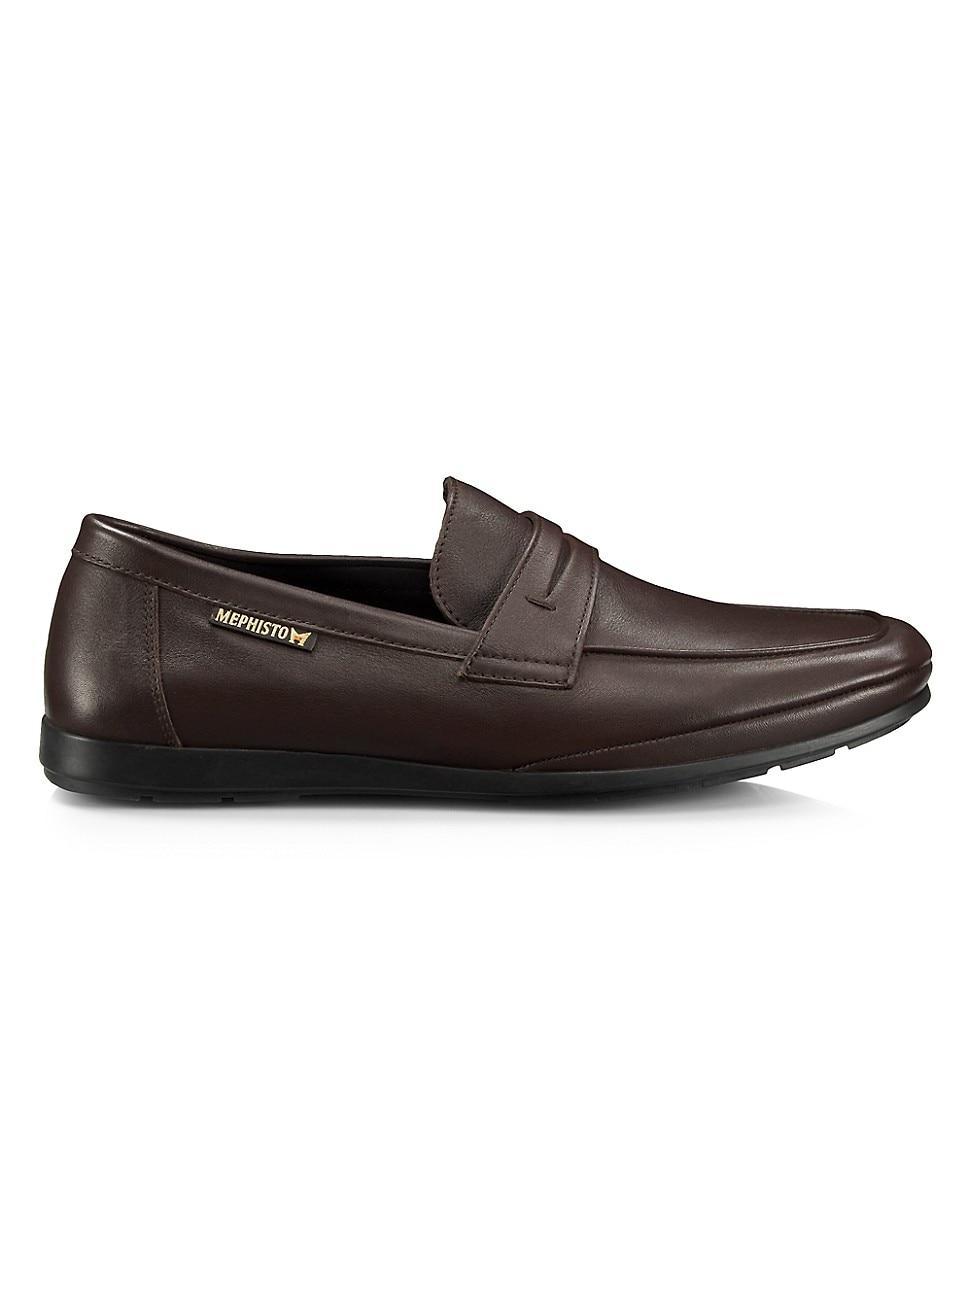 Mens Alexis Suede Moccasins Product Image